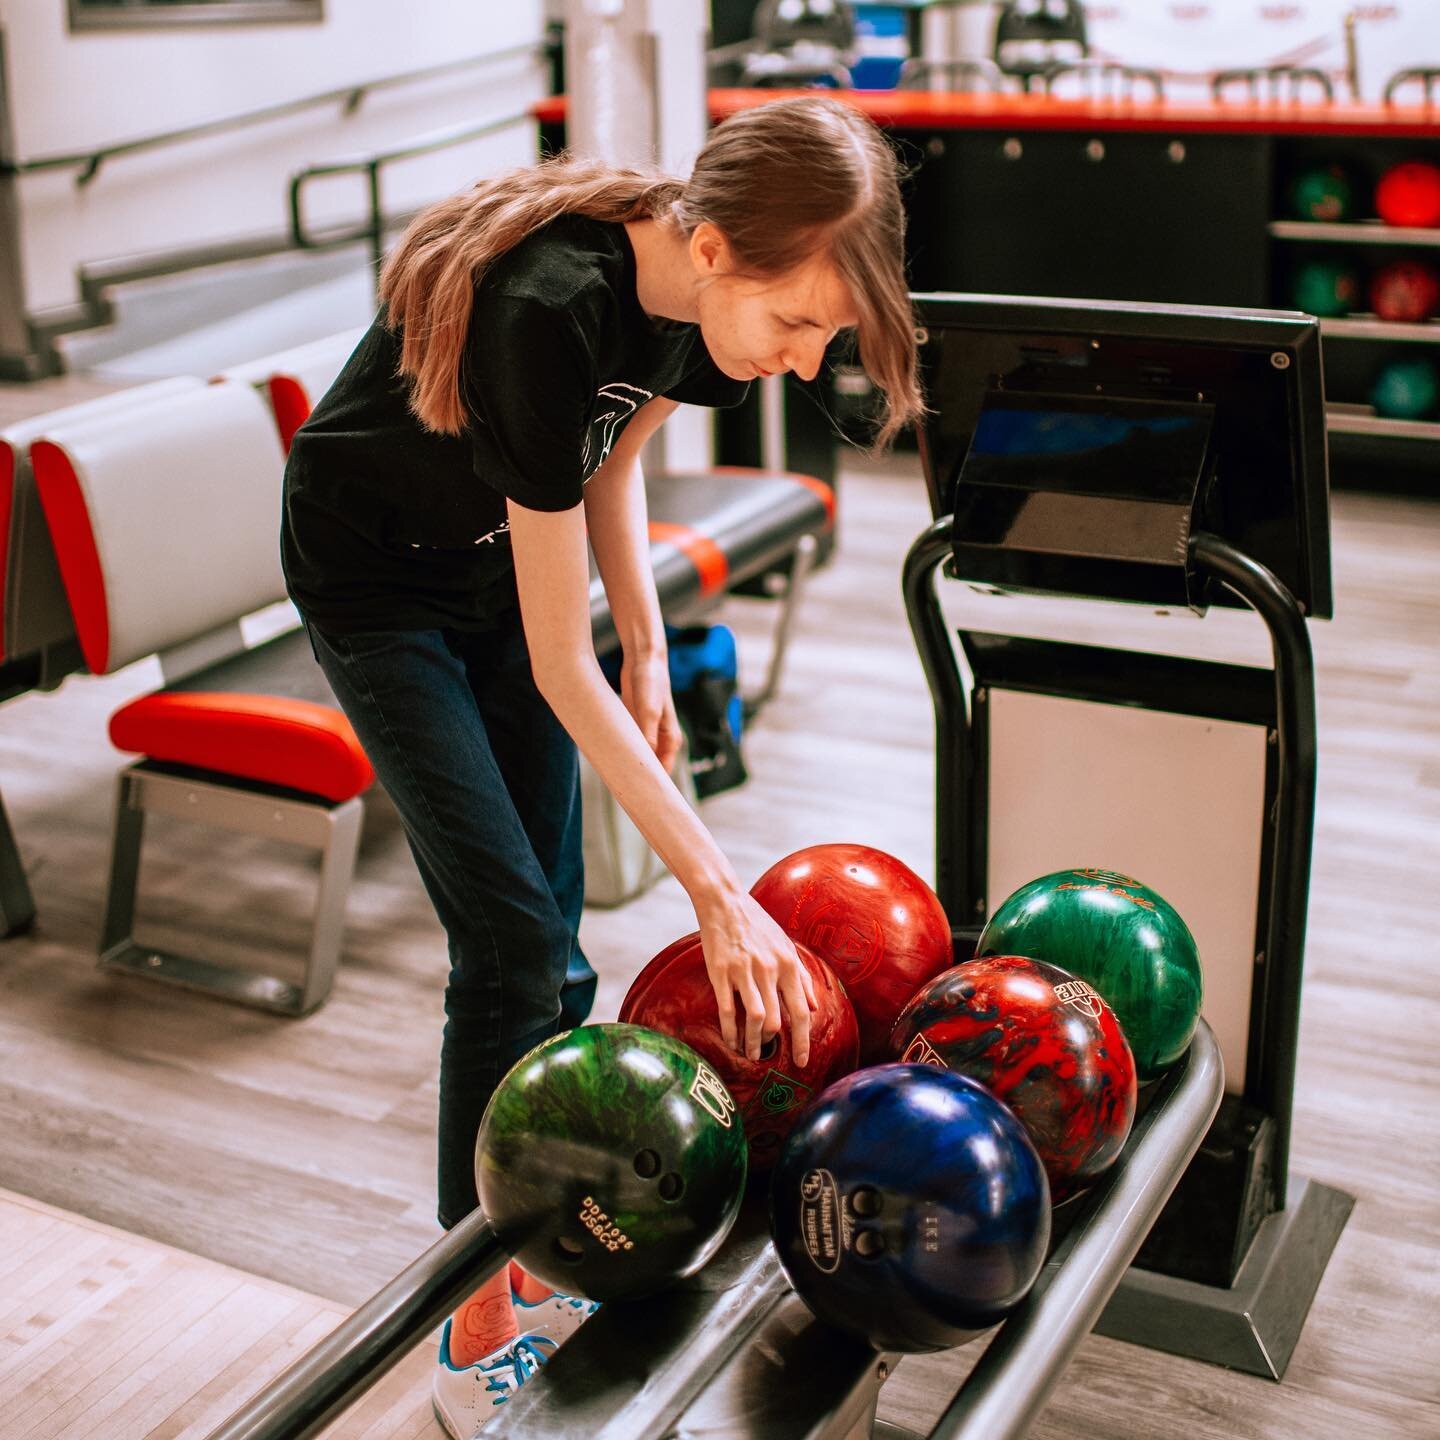 Gearing up for another weekend on the lanes! 🎳 Reserve your spot at the link in bio. #ValenciaLanes